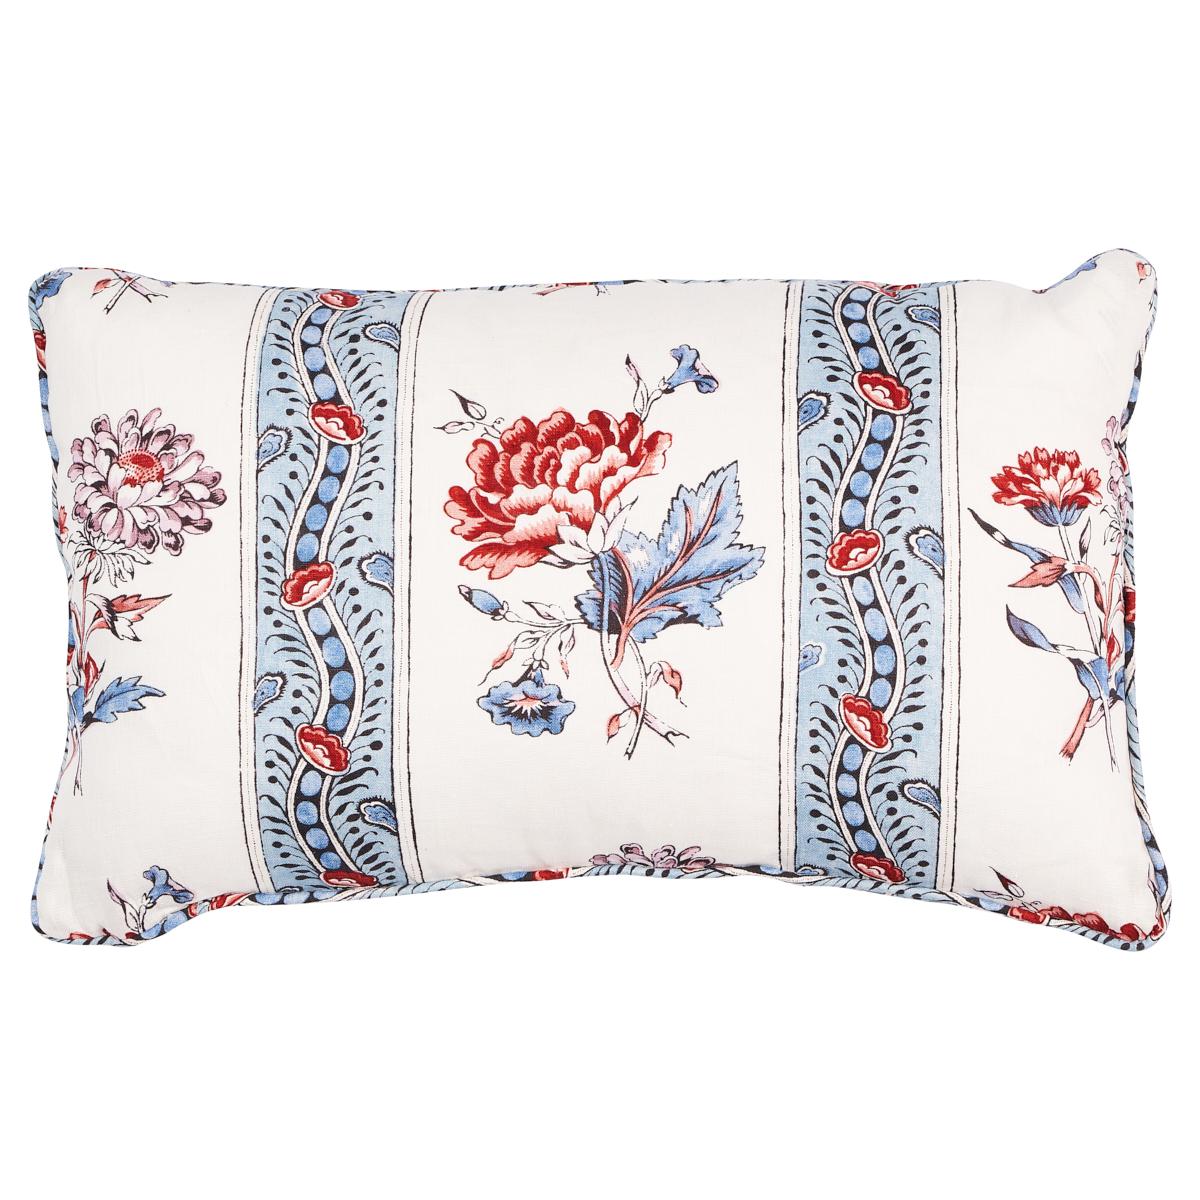 This pillow features Ariana Floral Stripe with a self welt finish. Inspired by an 18th-century French woodblock pattern, Ariana Floral Stripe in pearlware blue is beautifully printed on a soft linen ground. Pillow includes a feather/down fill insert